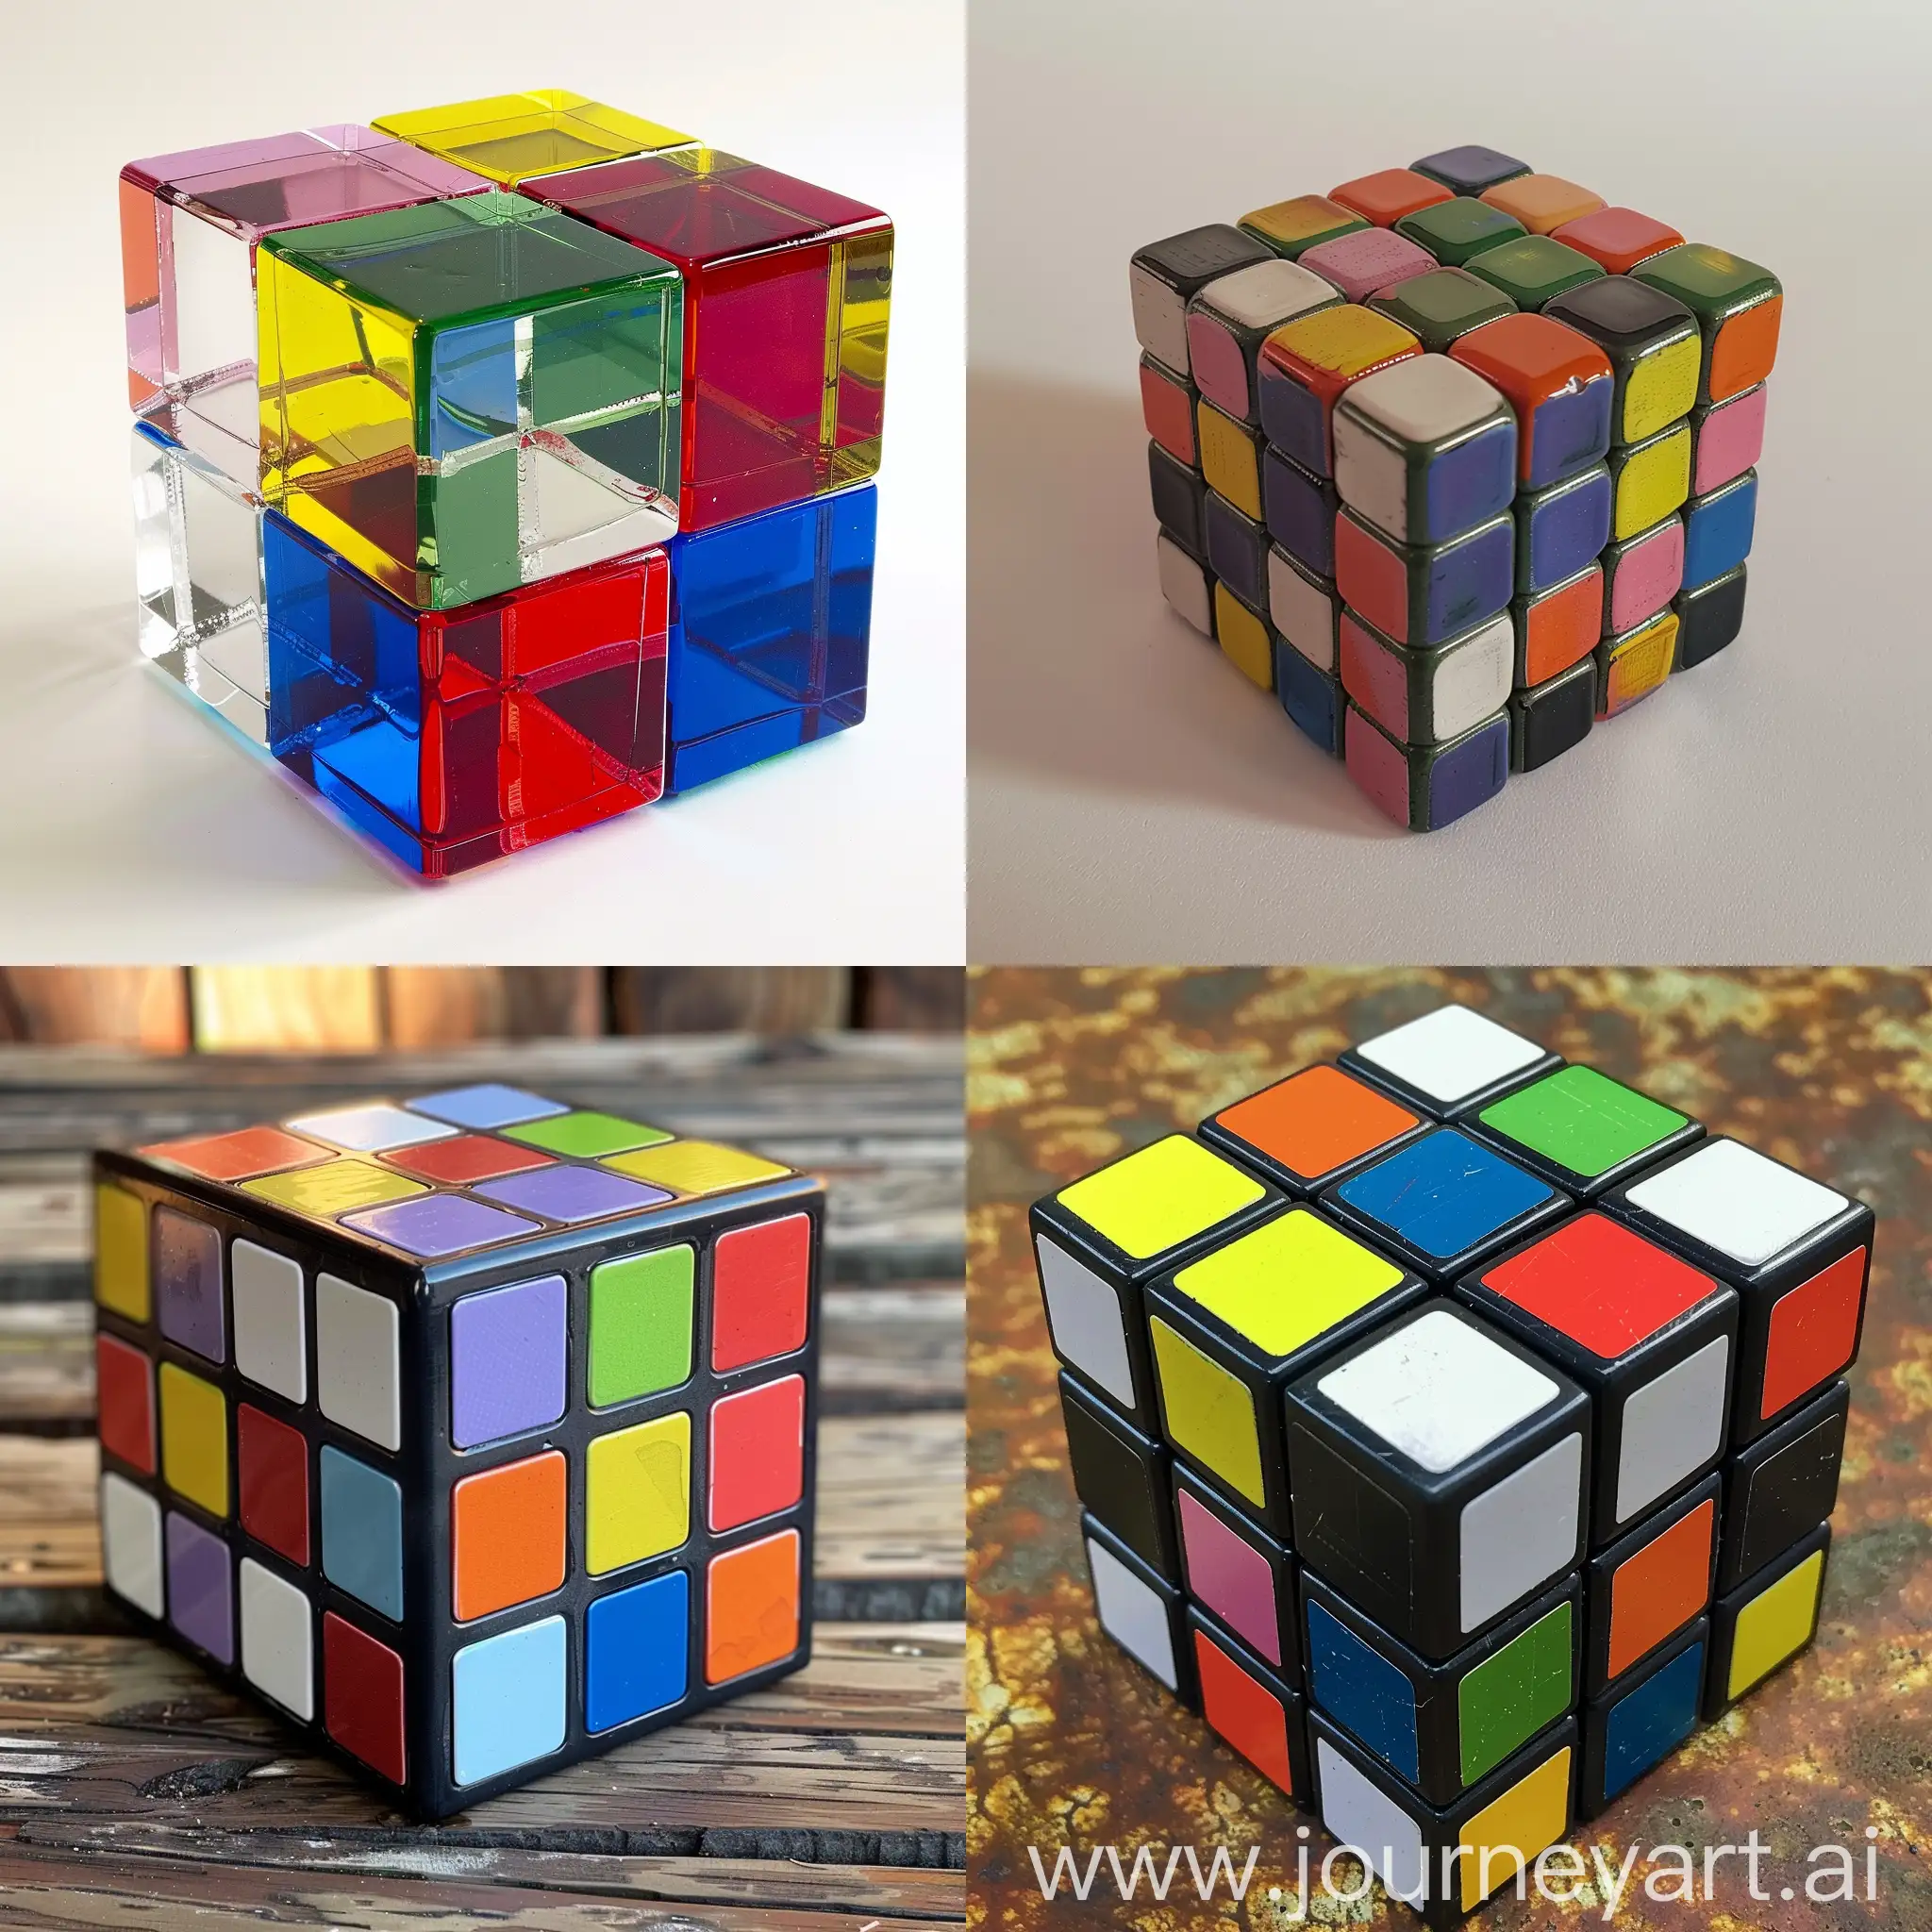 Vibrant-Multicolored-Cube-Sculpture-on-Reflective-Surface